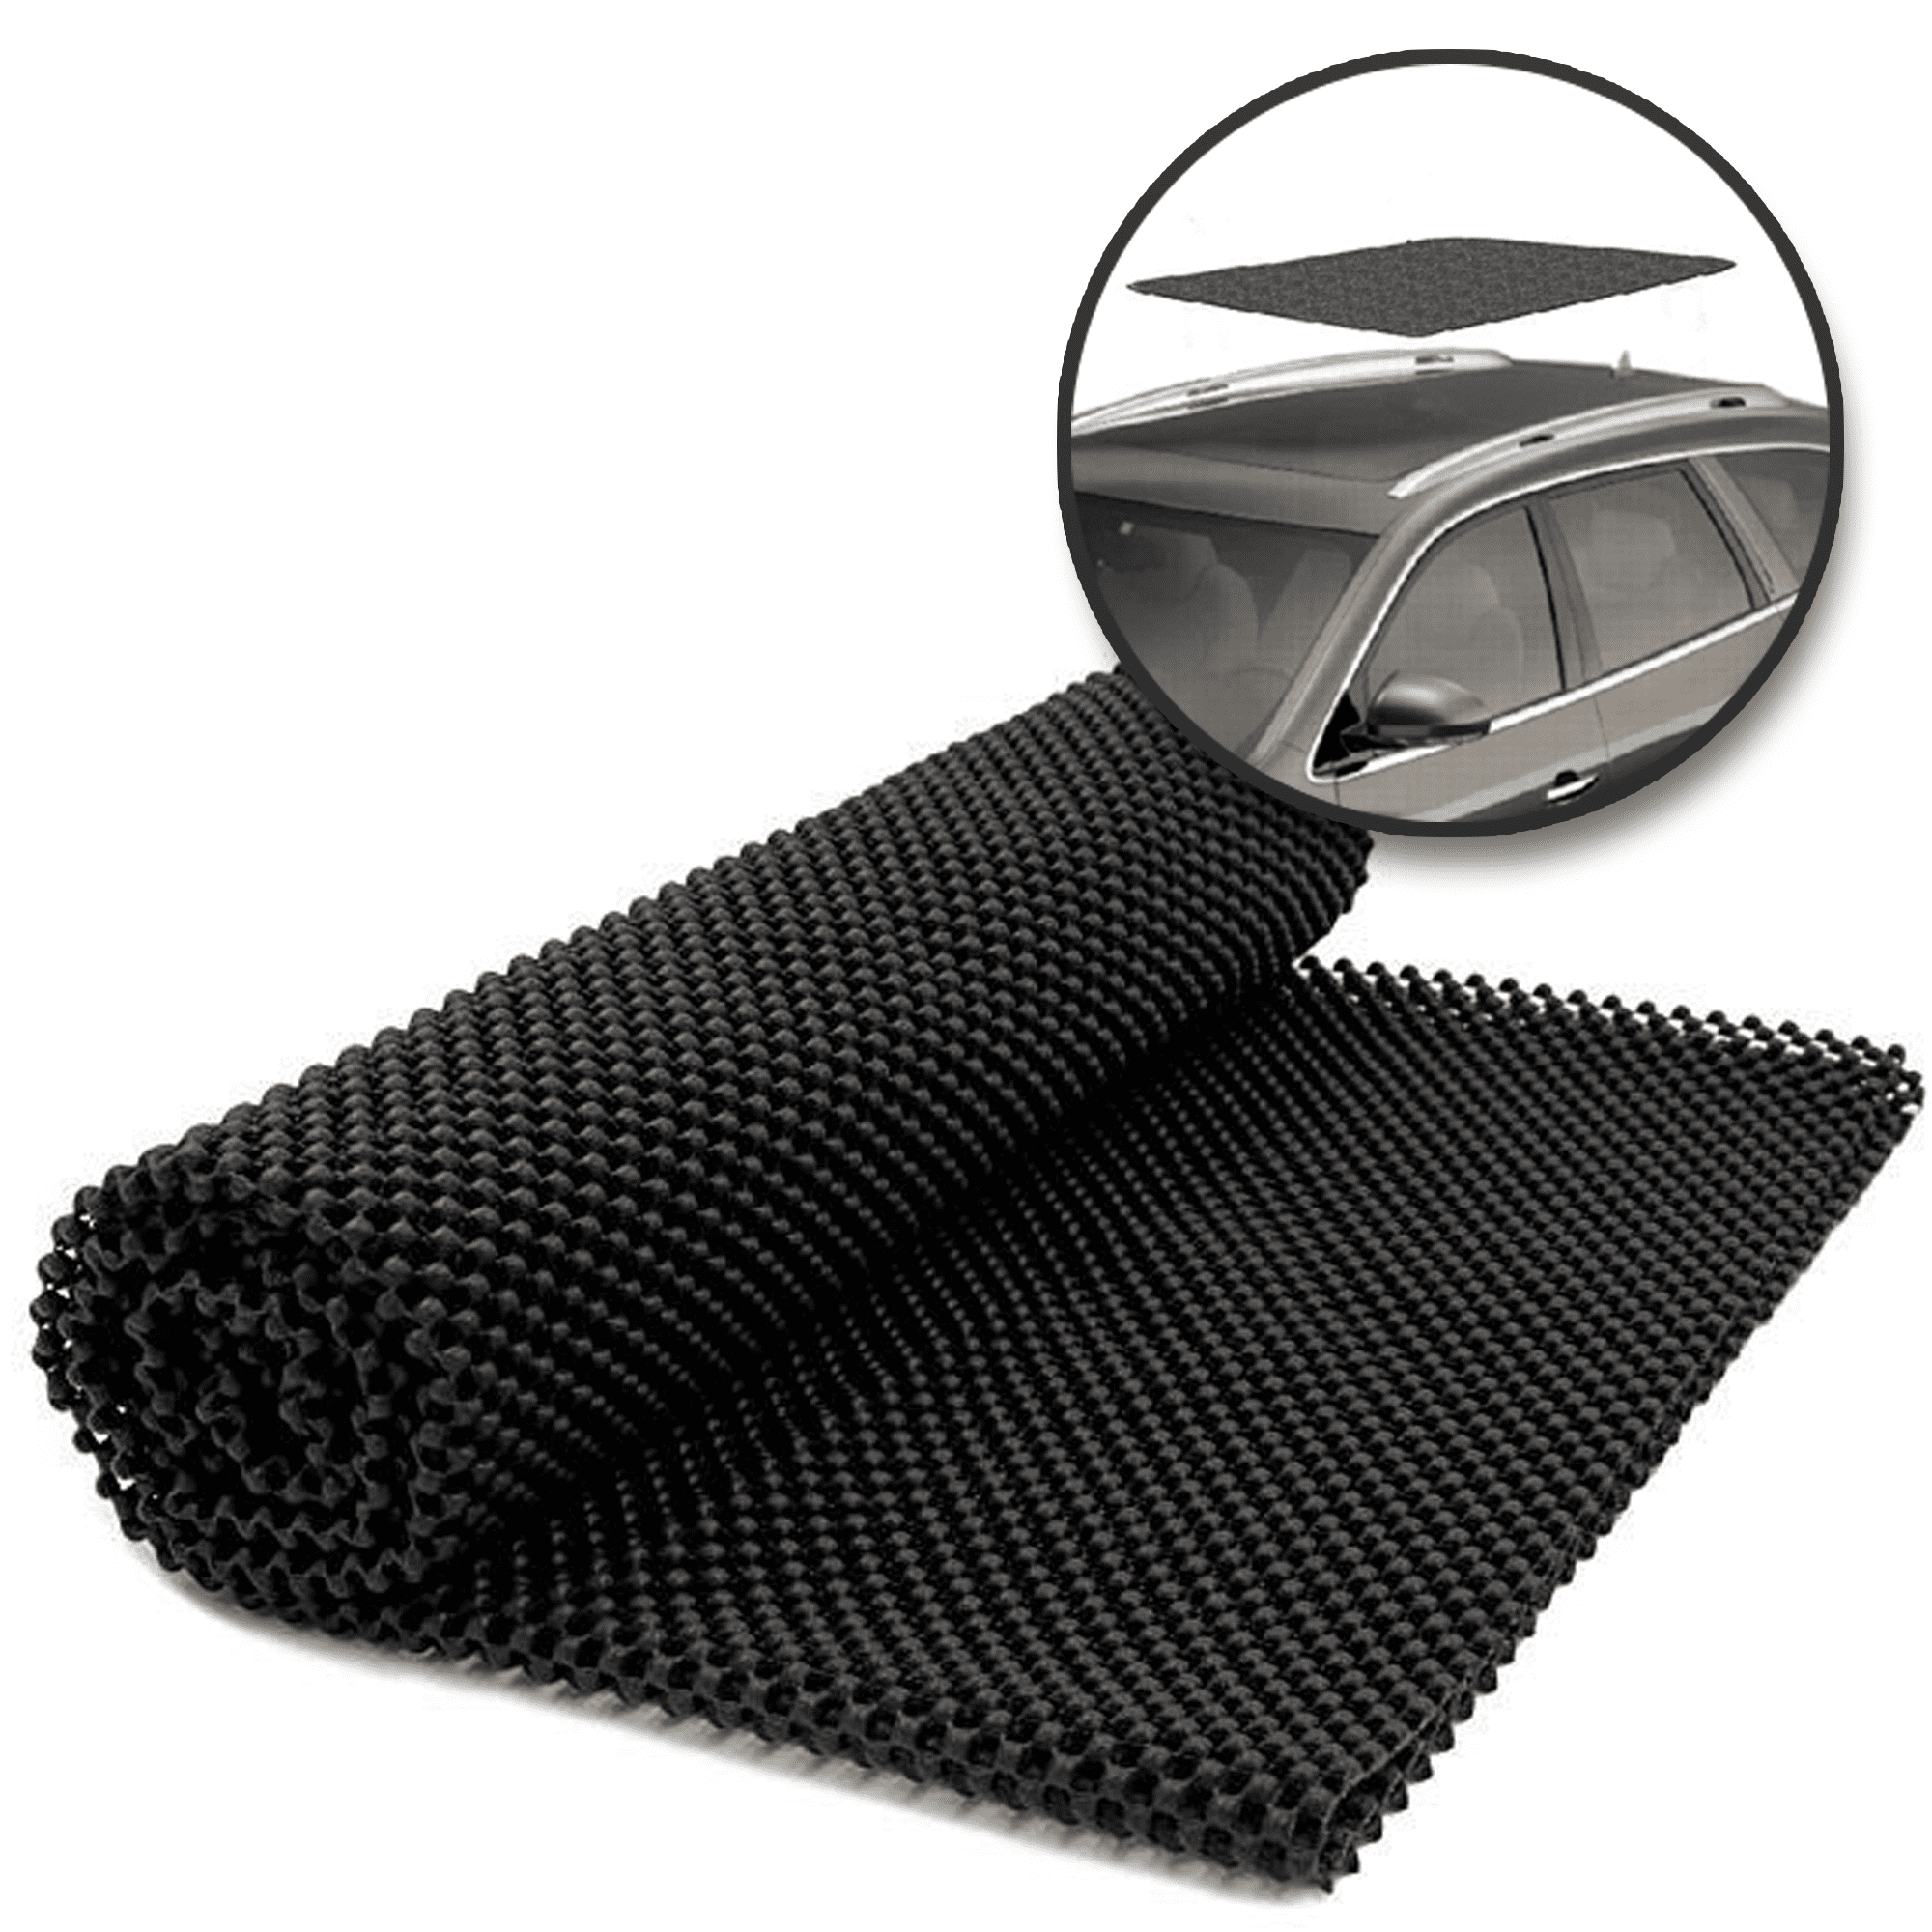 Mockins 43 x 39 Protective Car Roof Mat, Anti-Slip Strong Grip PVC Foam, Use on Any Vehicle for Extra Cushioning